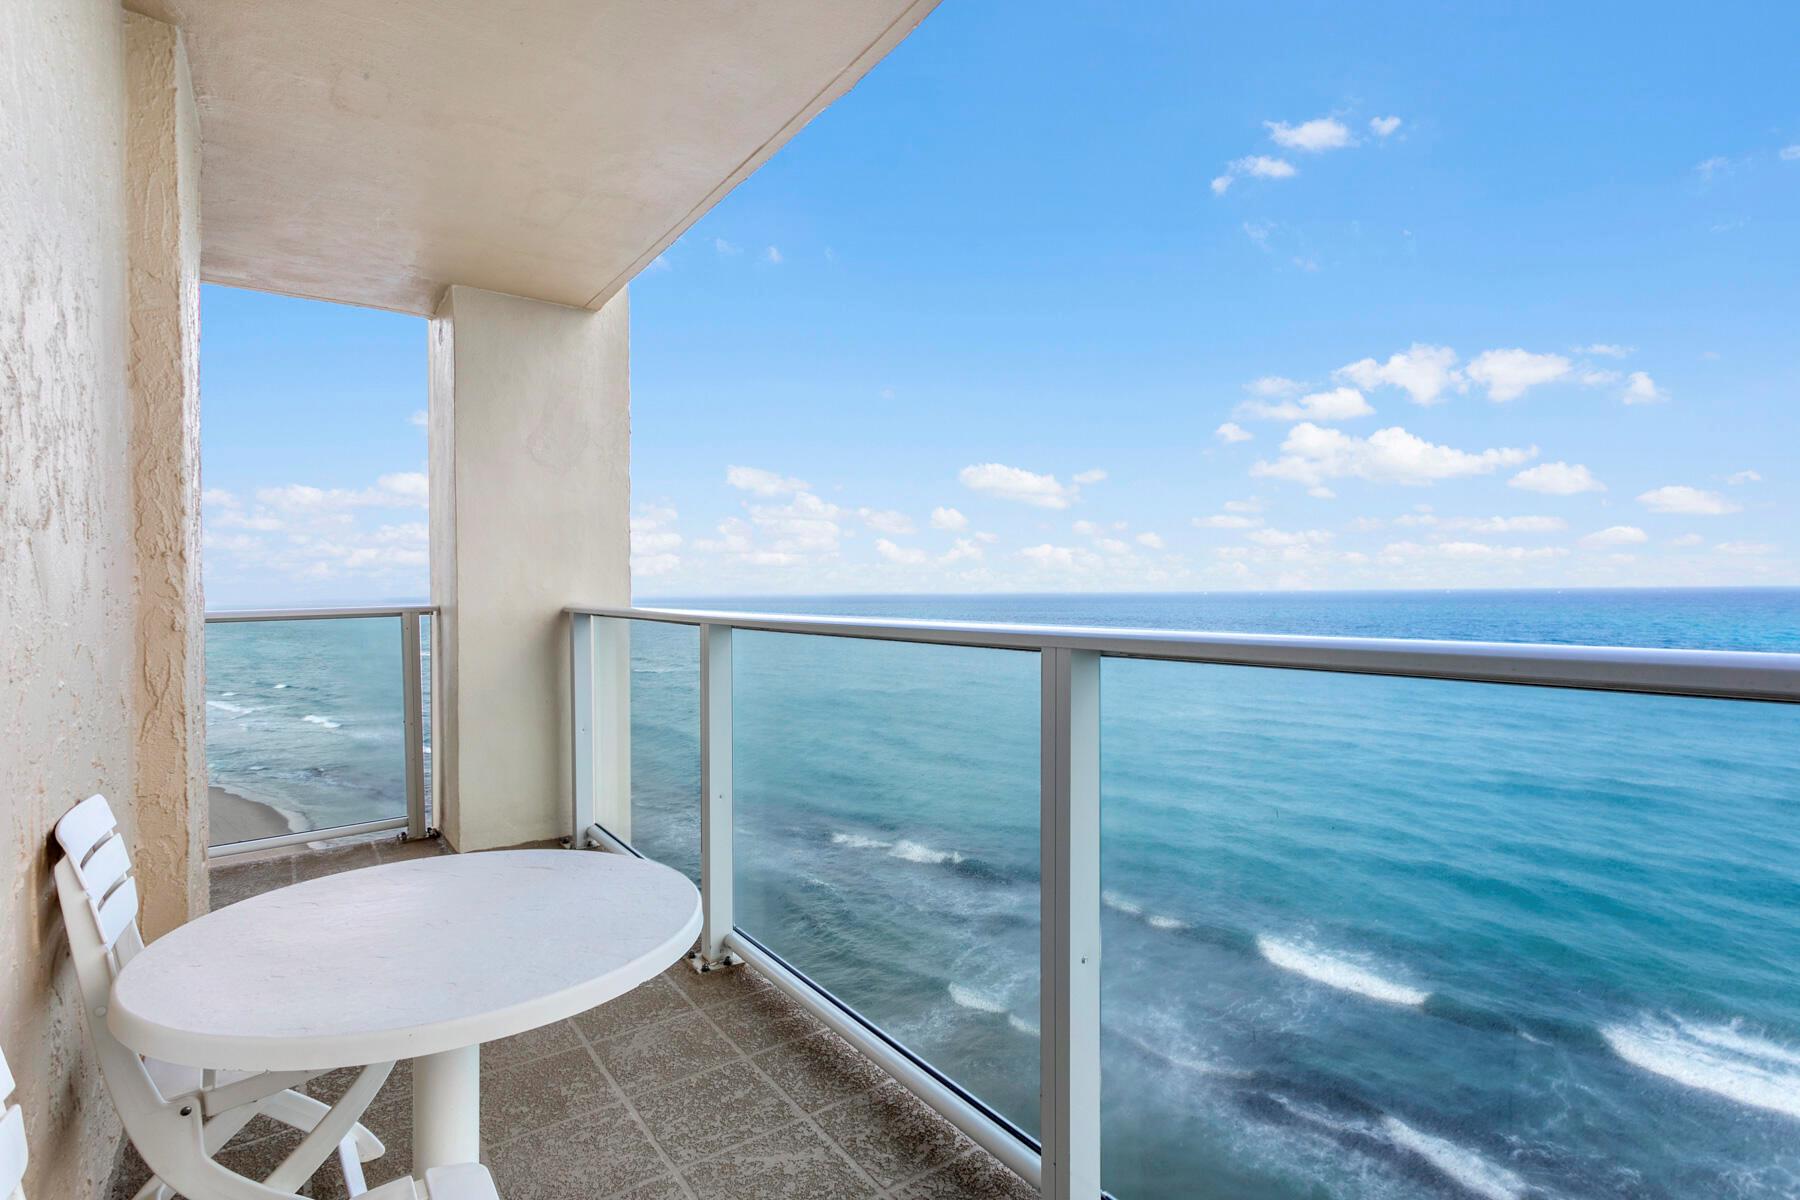 ENJOY EXPANSIVE VIEWS OF THE ATLANTIC OCEAN..RARELY AVAILABLE 6 STACK WITH UNOBSTRUCTED VIEWS FROM EVERY ROOM.OFFERED FULLY FURNISHED AND READY FOR YOUR PERSON TOUCH.